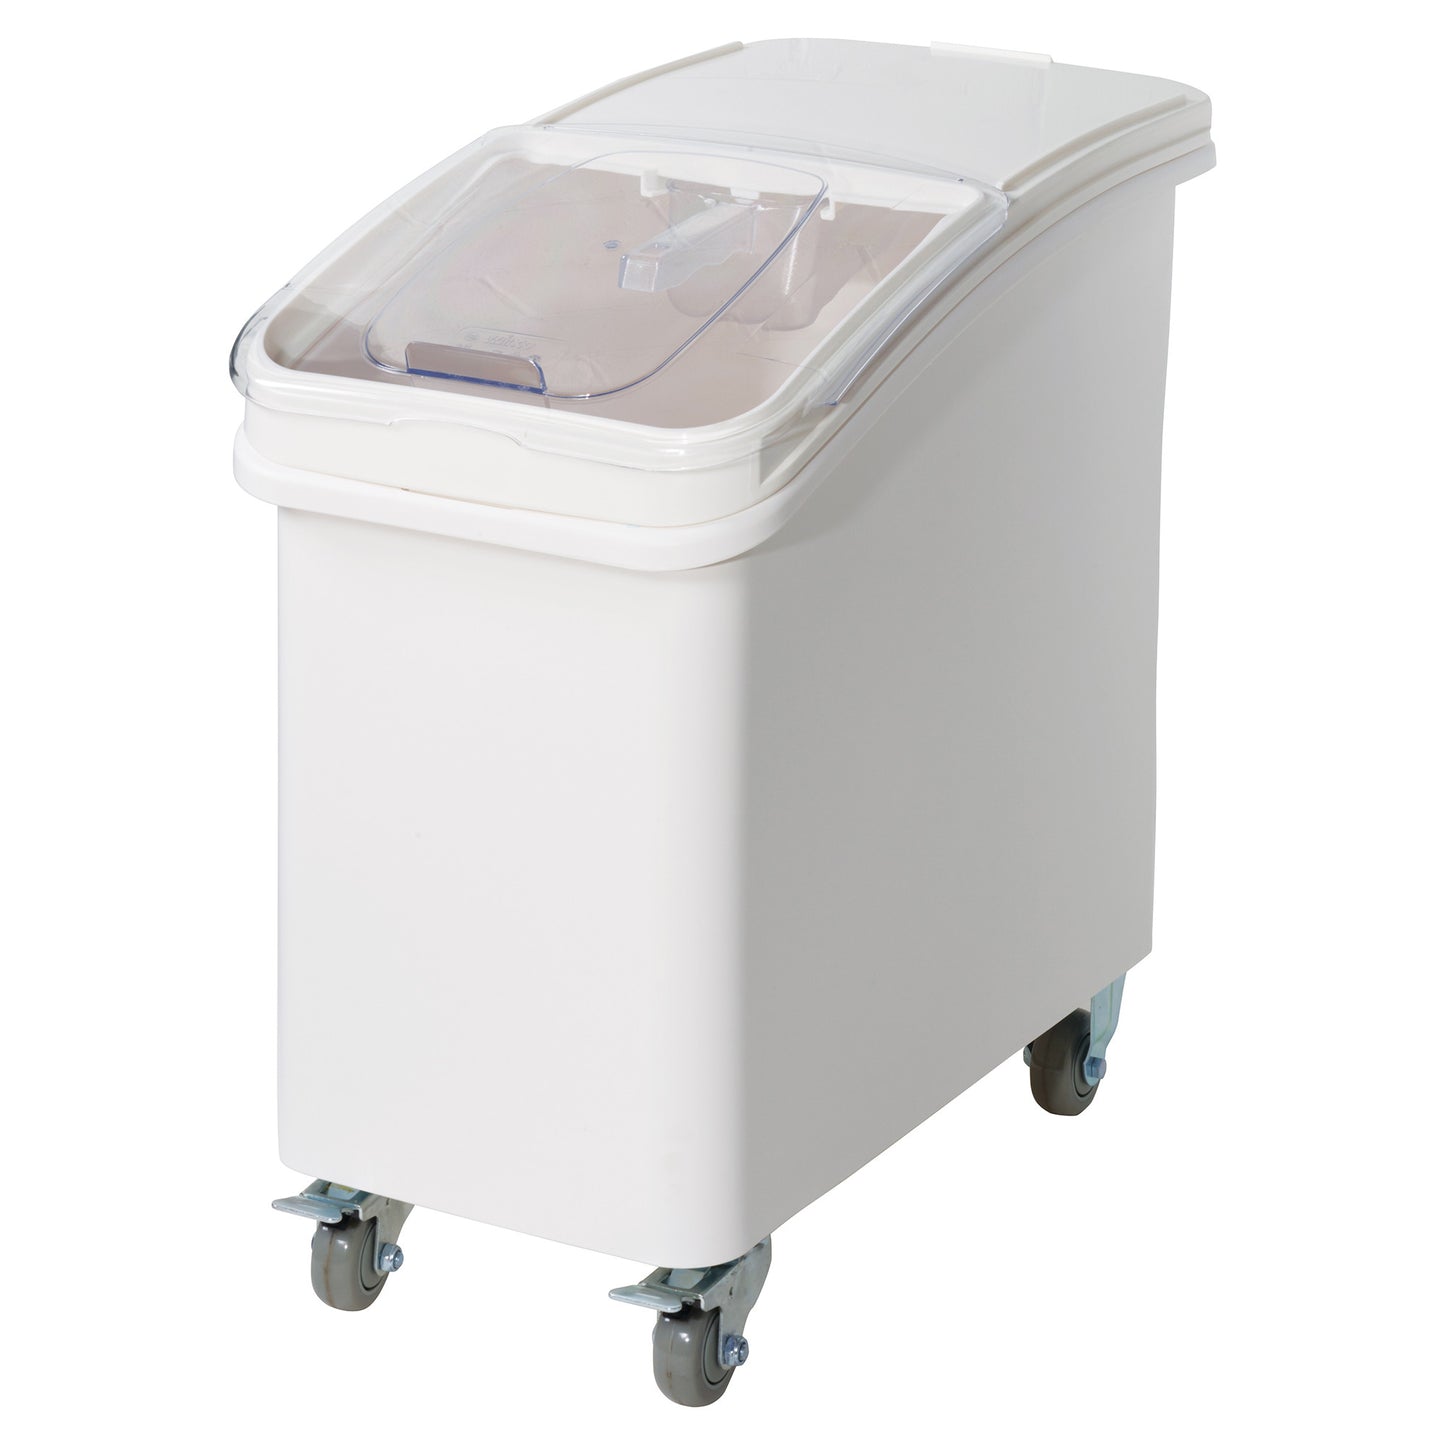 IB-27 - 27 Gallon Ingredient Bin with Brake Casters and Scoop